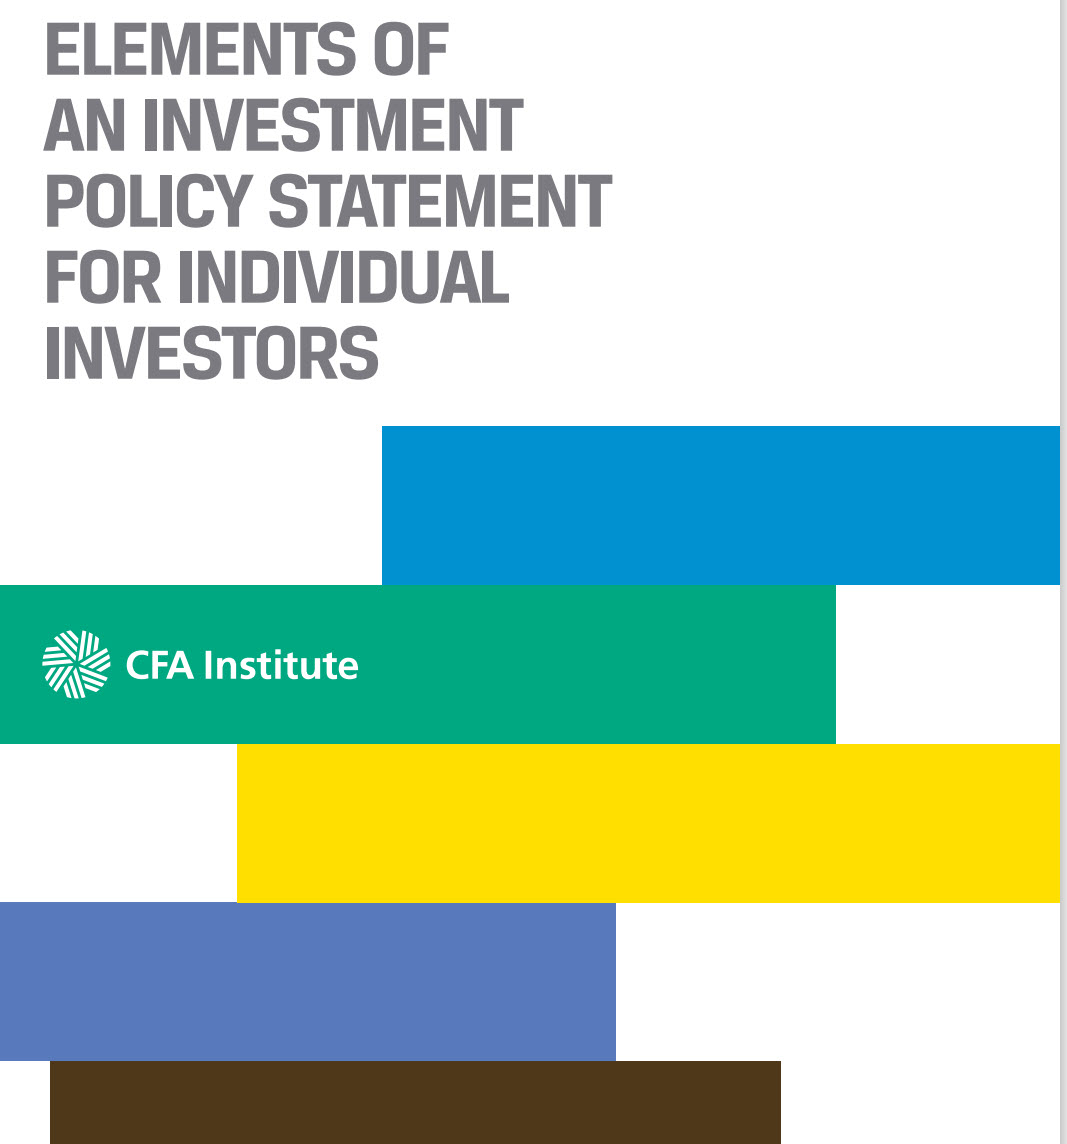 Investment Policy Statements